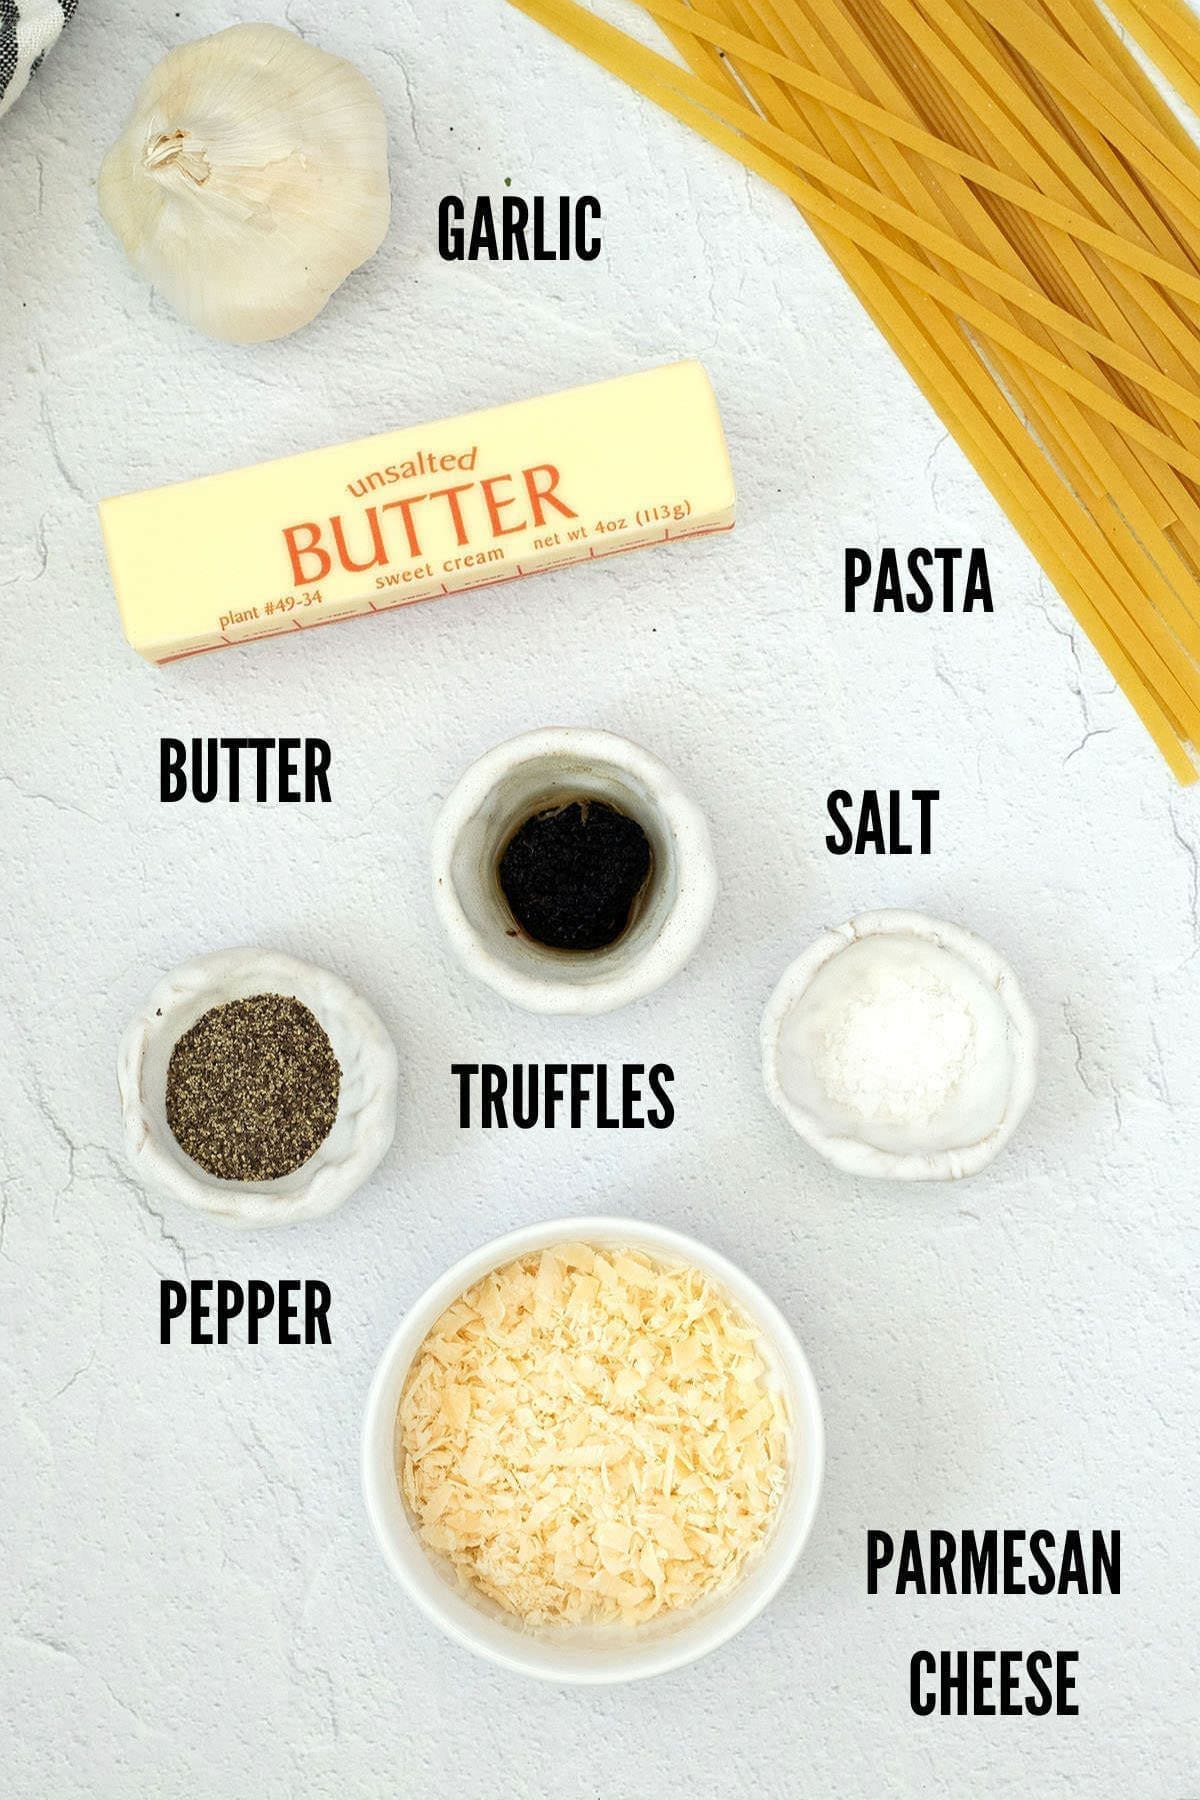 Labeled photo showing ingredients needed to make truffles with pasta.